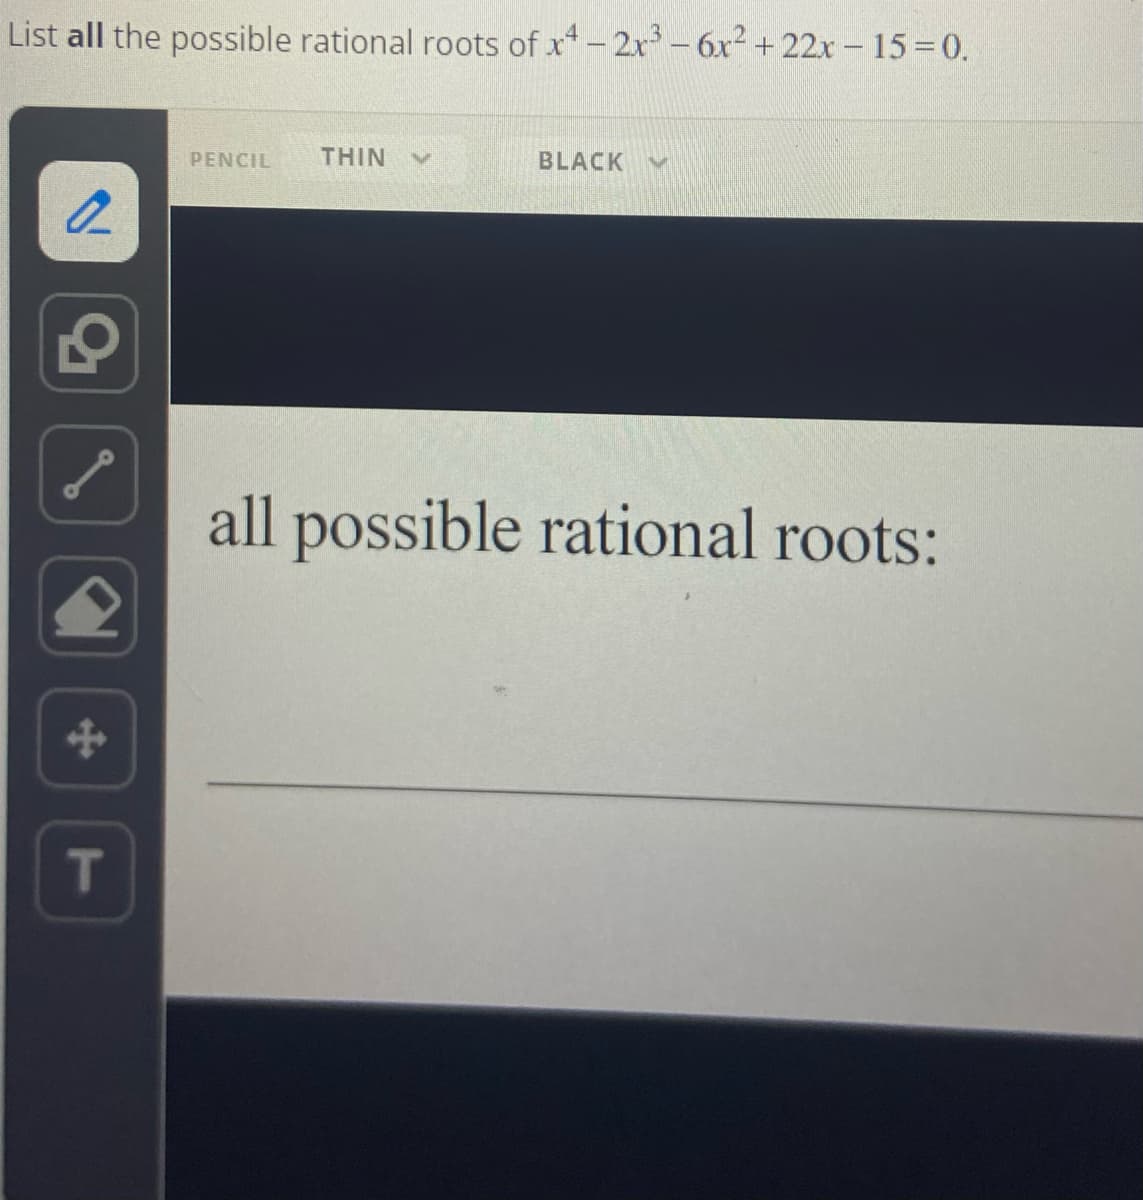 List all the possible rational roots of x4 - 2x³-6x² +22x - 15 = 0.
2
P
T
PENCIL THIN
BLACK Bull
all possible rational roots: